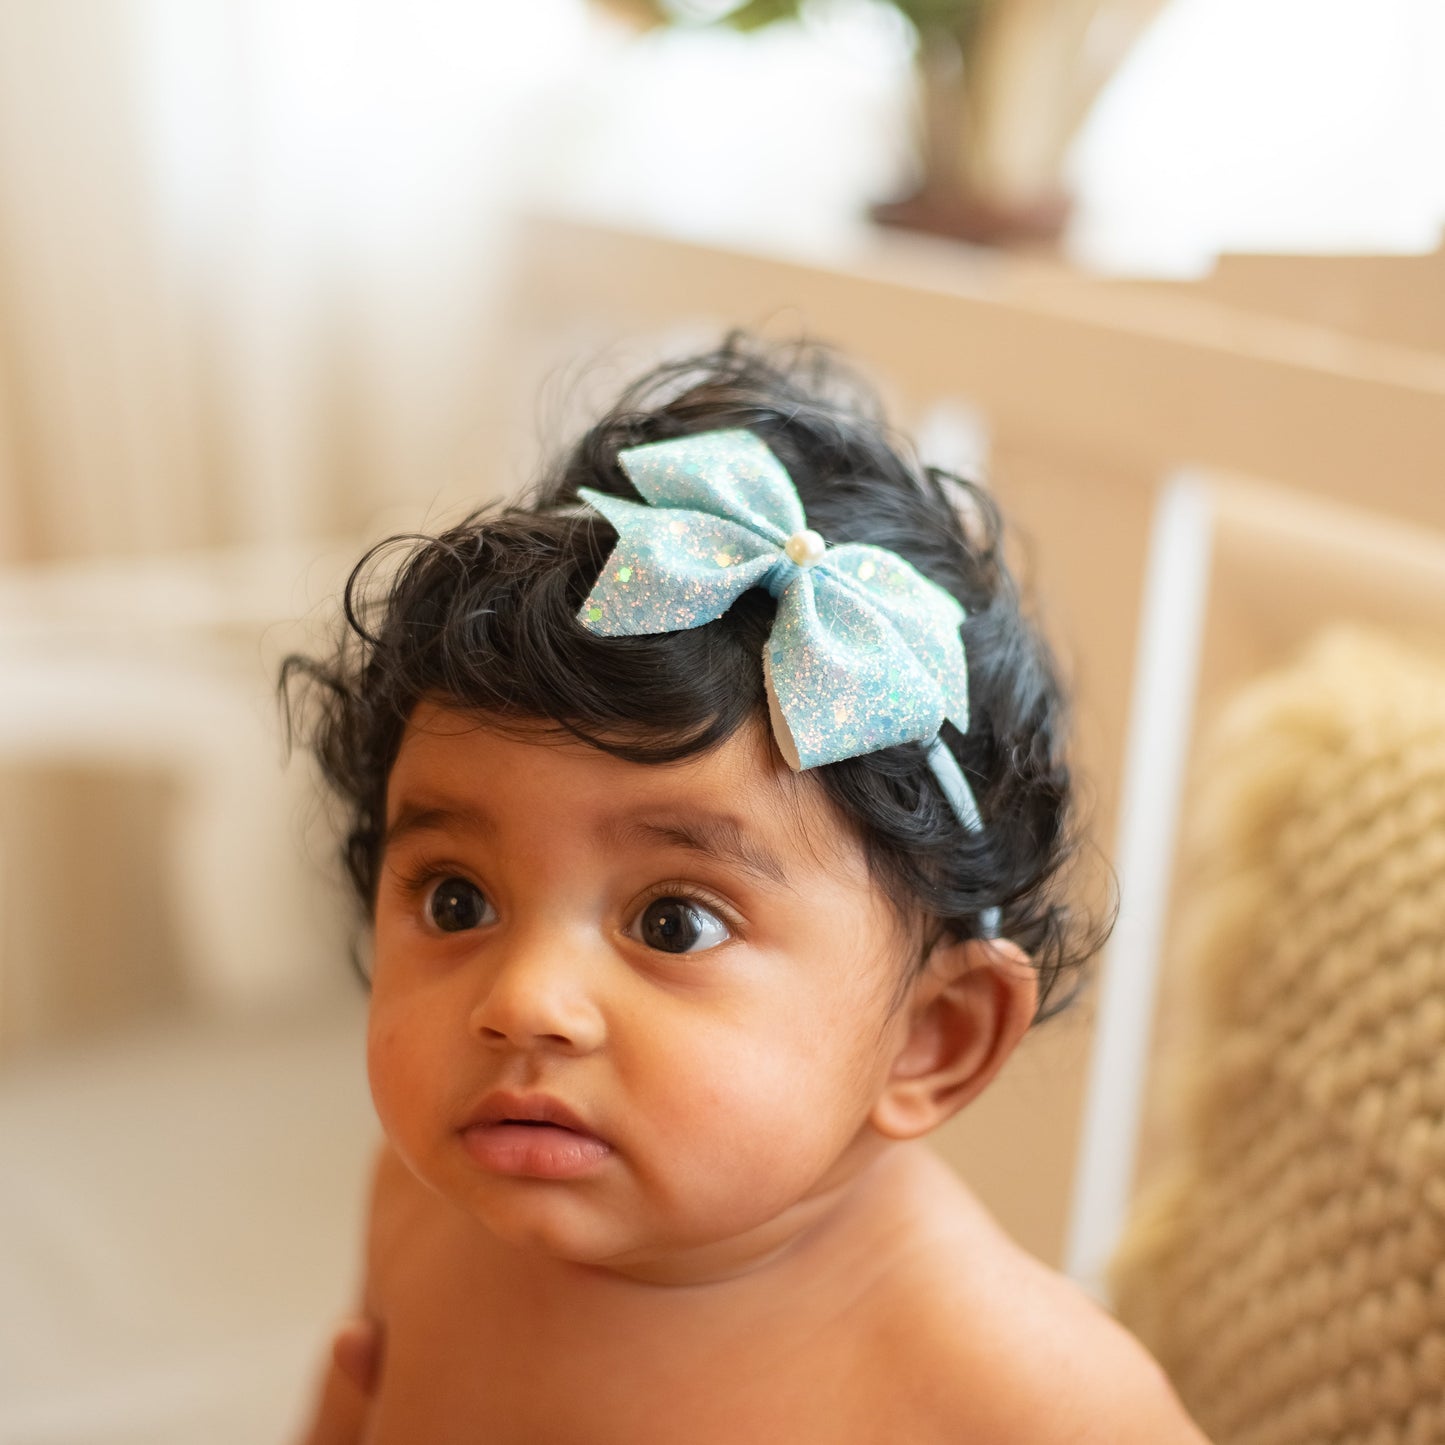 Soft Infant Stretchy bands with a Glitter Bow - Light Blue